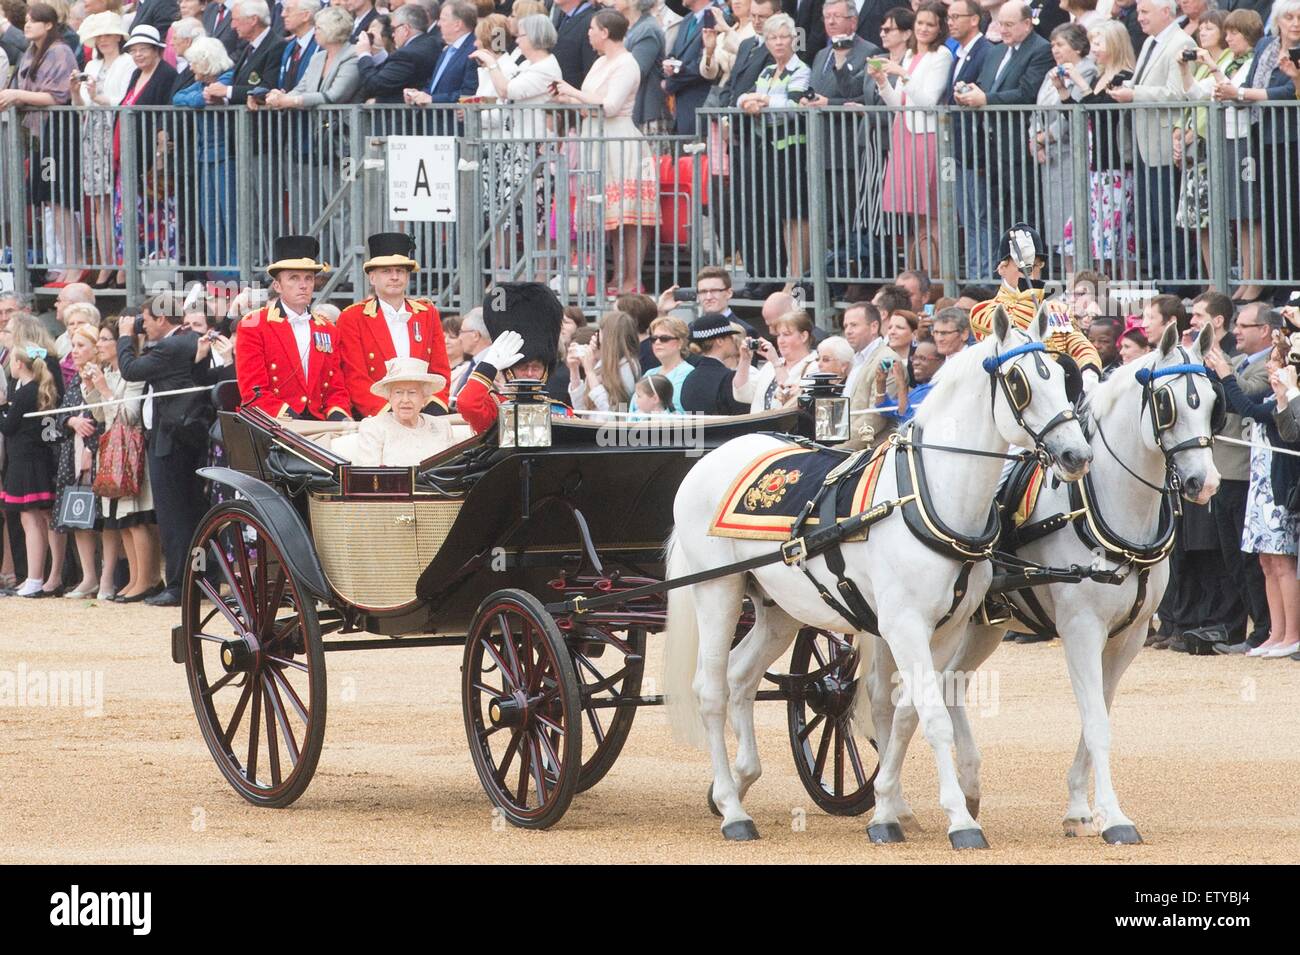 Queen Elizabeth II and Prince Philip arrives by carriage for the annual Trooping the Colour parade marking her official birthday on Horse Guards Parade June 13, 2015 in London, England. Stock Photo